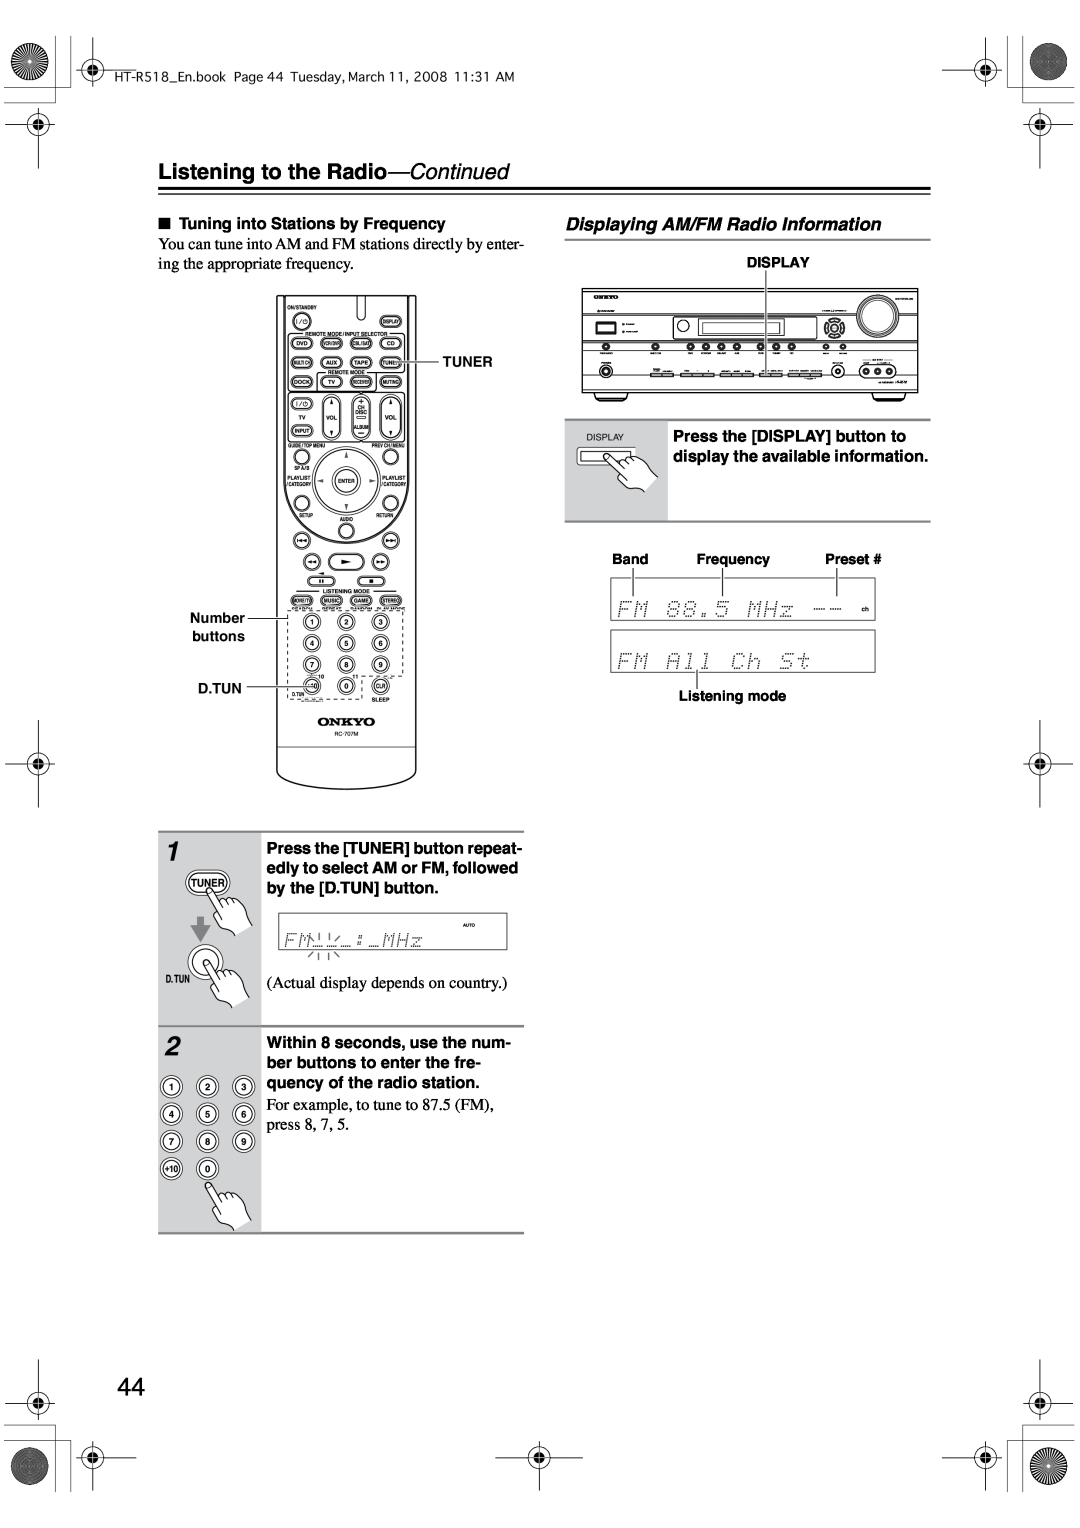 Onkyo HT-R518 instruction manual Listening to the Radio-Continued, Displaying AM/FM Radio Information 